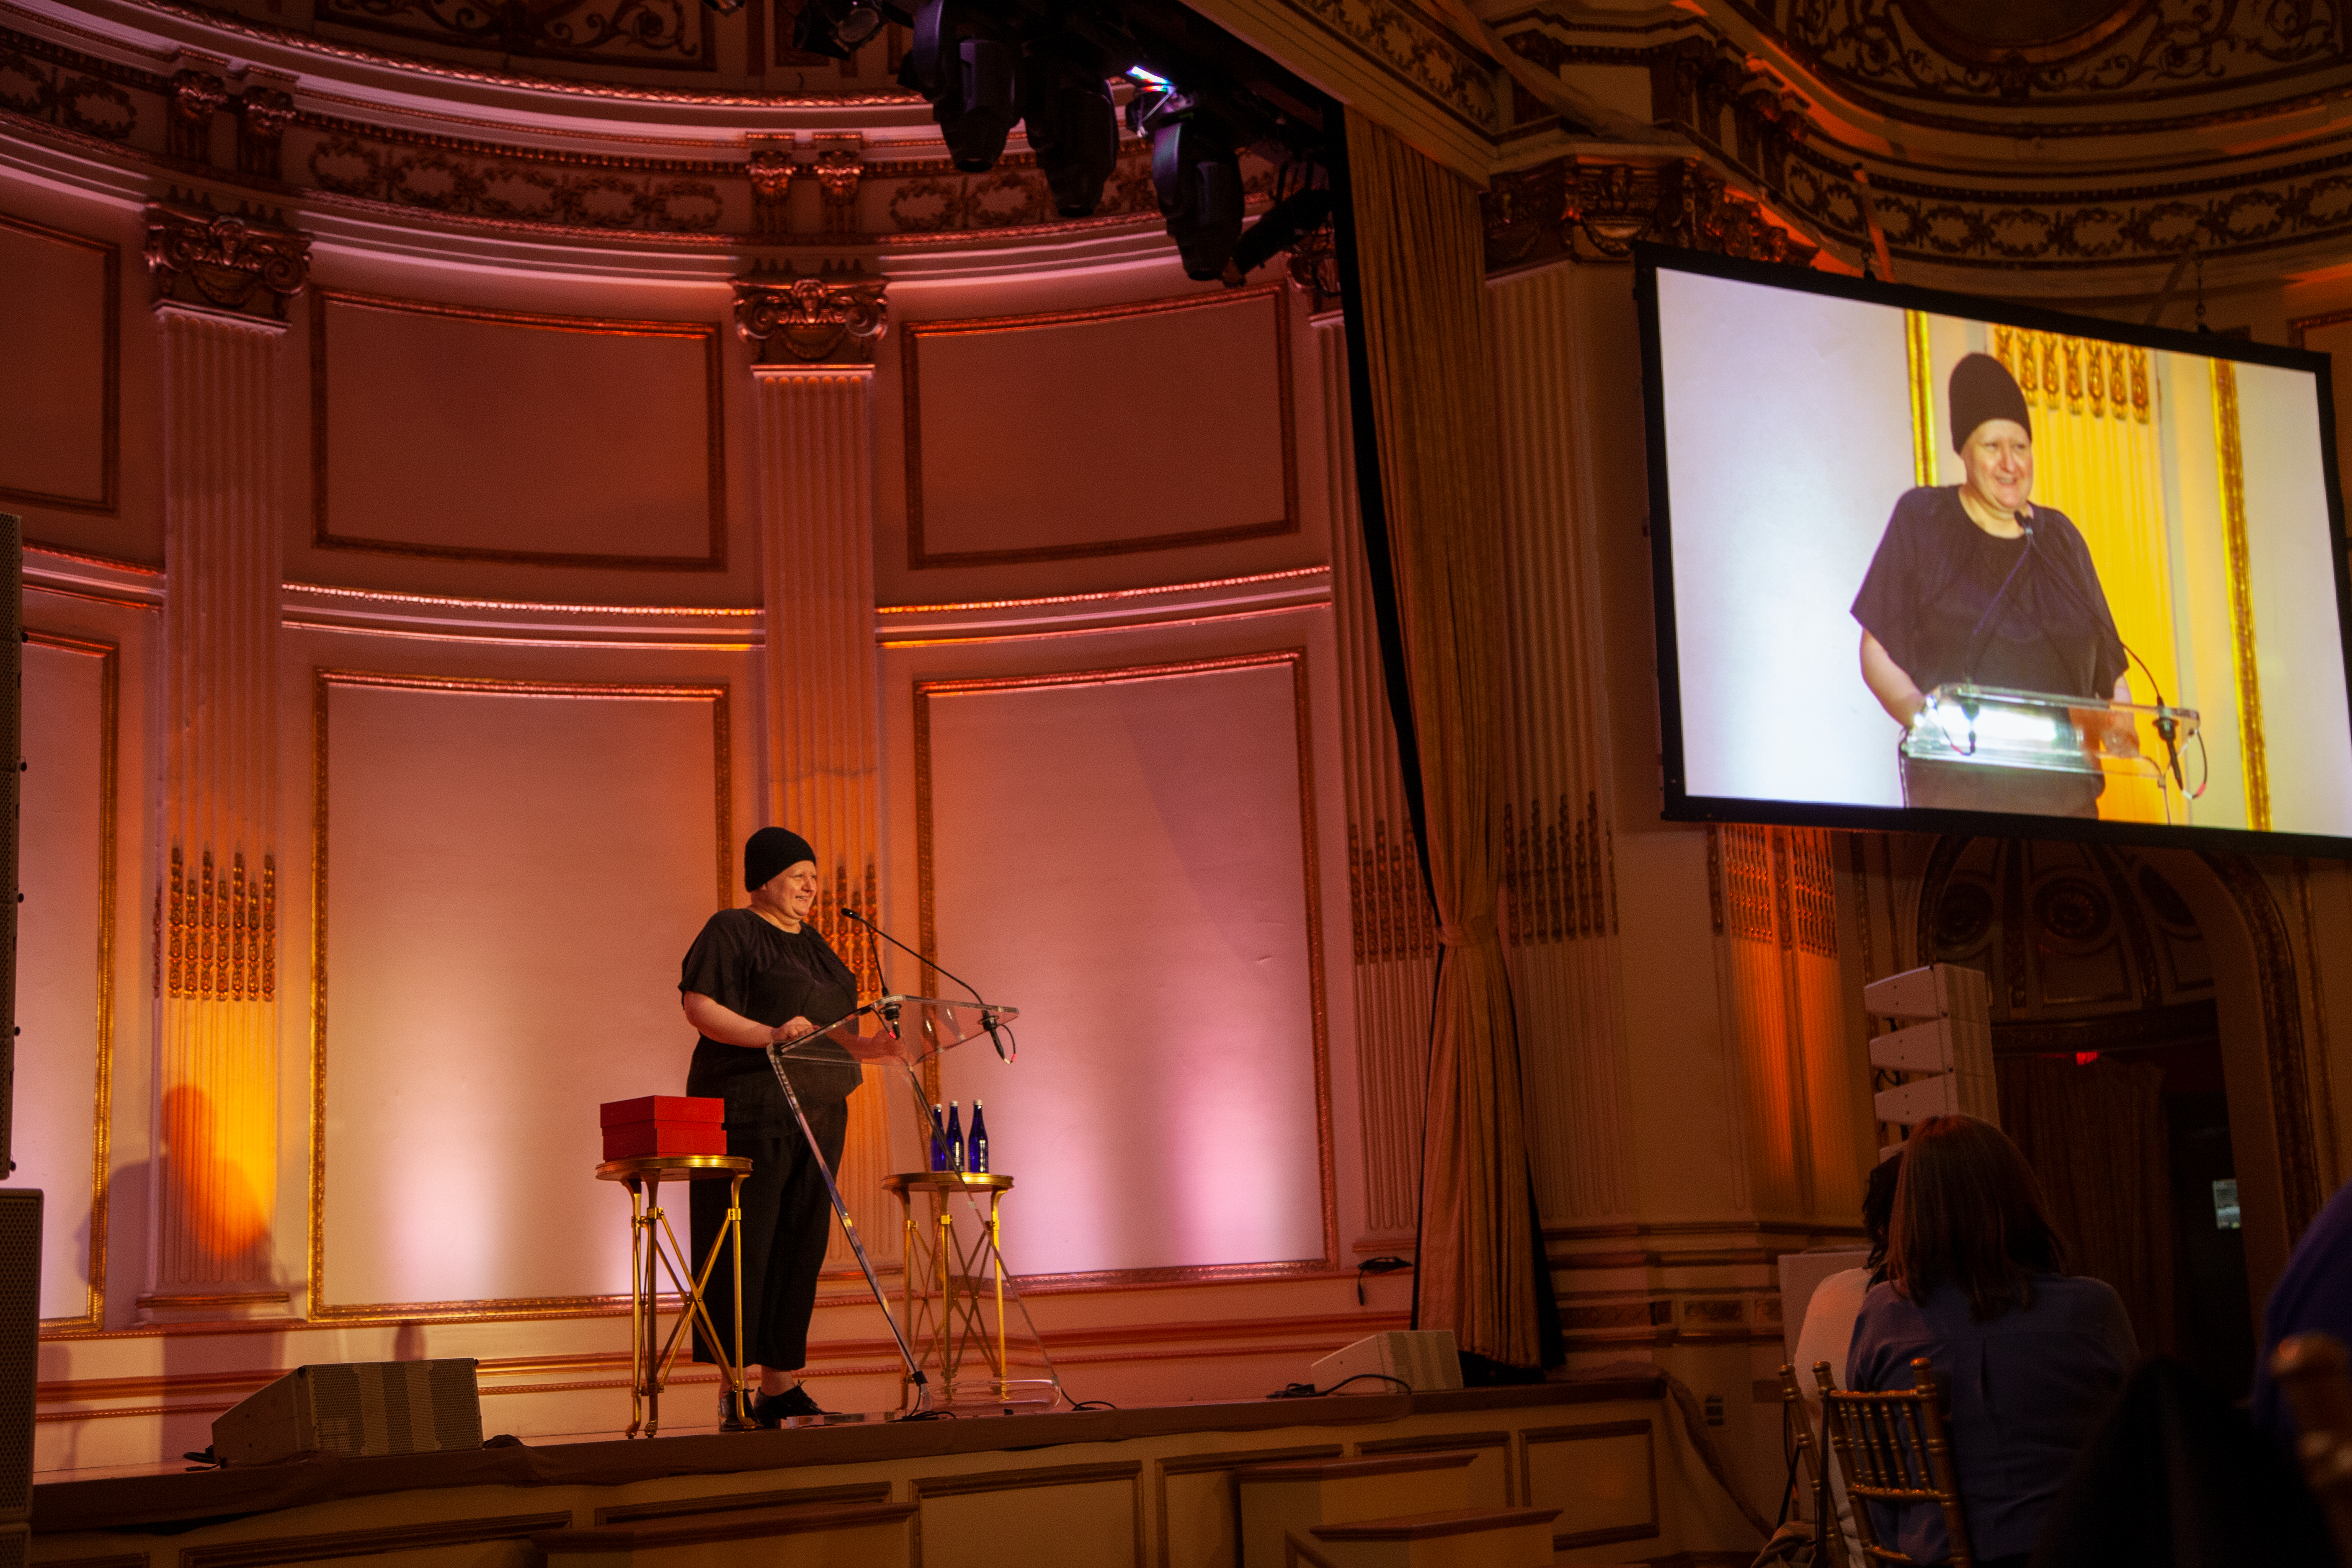 Alexandra Waldman, Co-Founder and Creative Director of Universal Standard, wears all black with a black beanie and stands at a clear podium on a stage at the Plaza's Grand Ballroom.